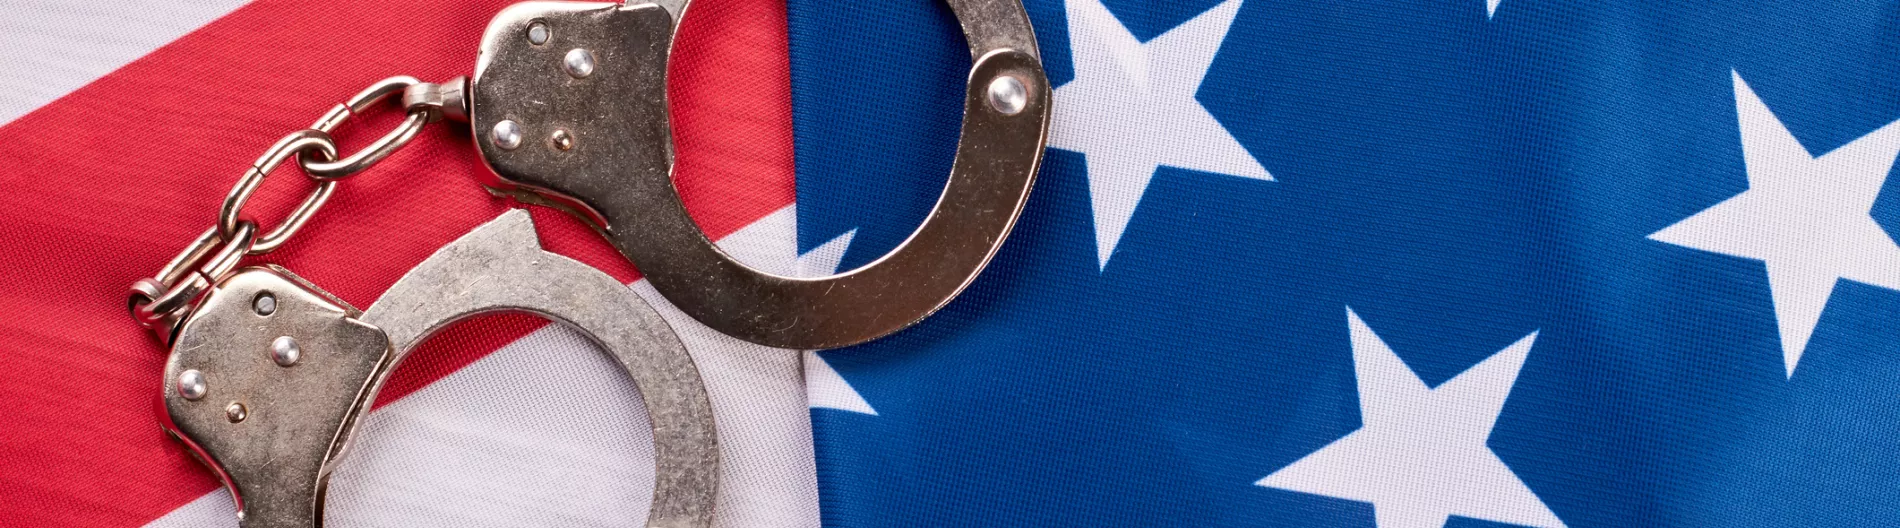 Handcuffs and American flag